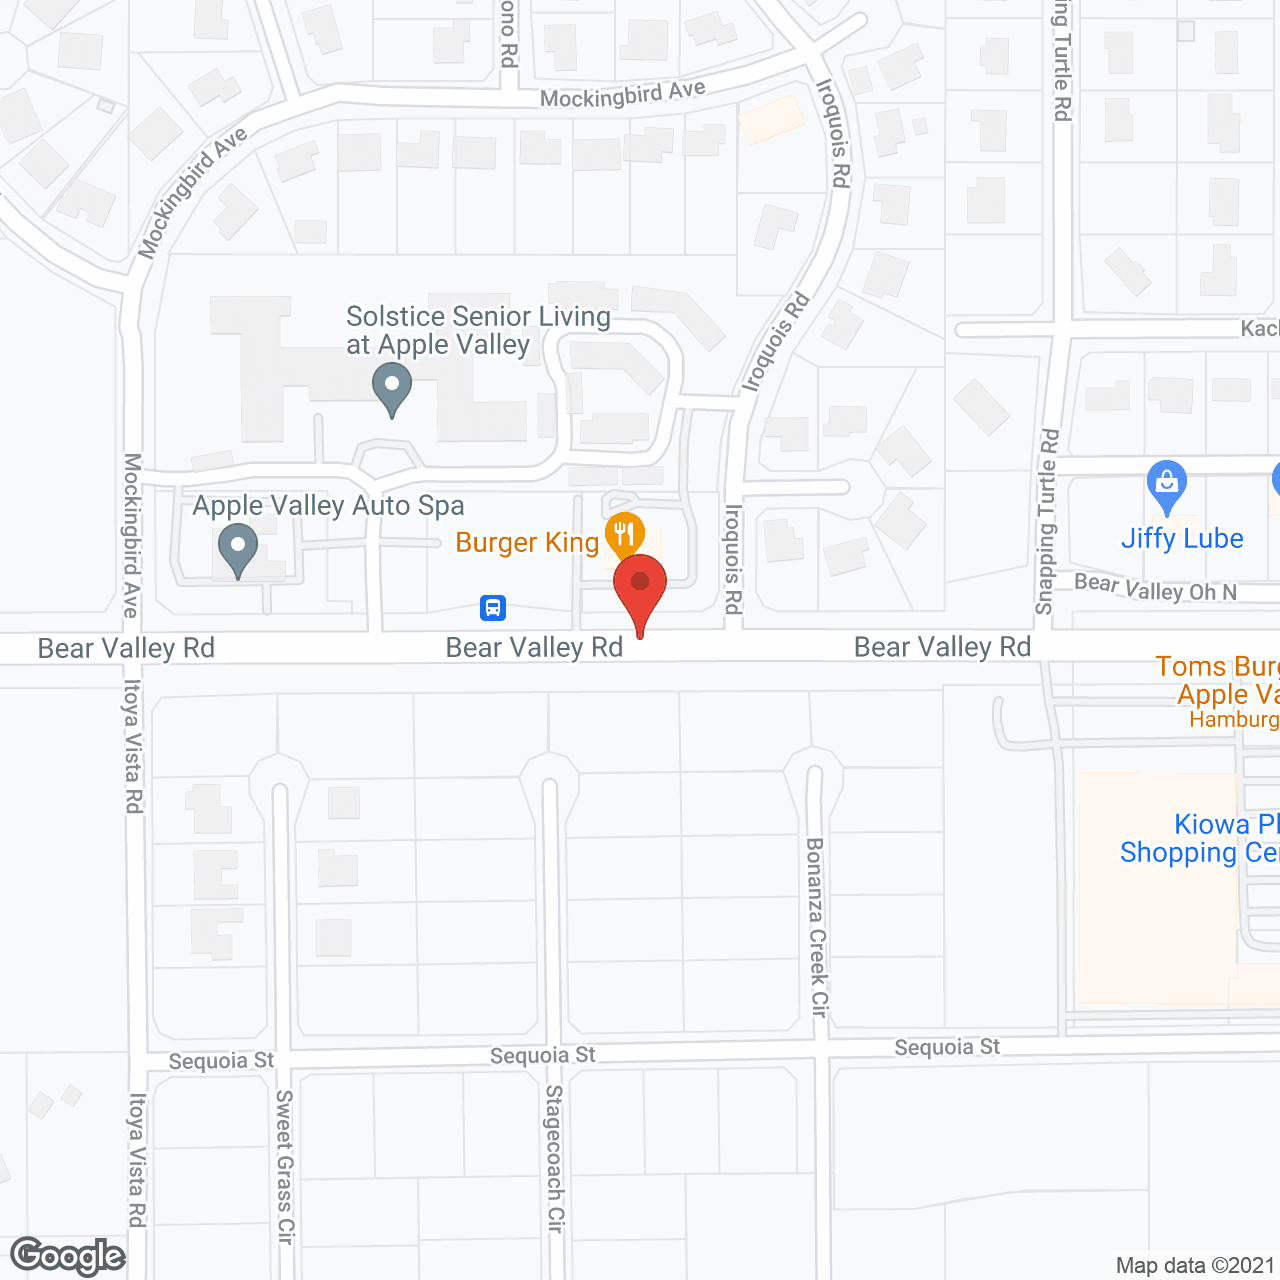 Solstice Senior Living at Apple Valley in google map